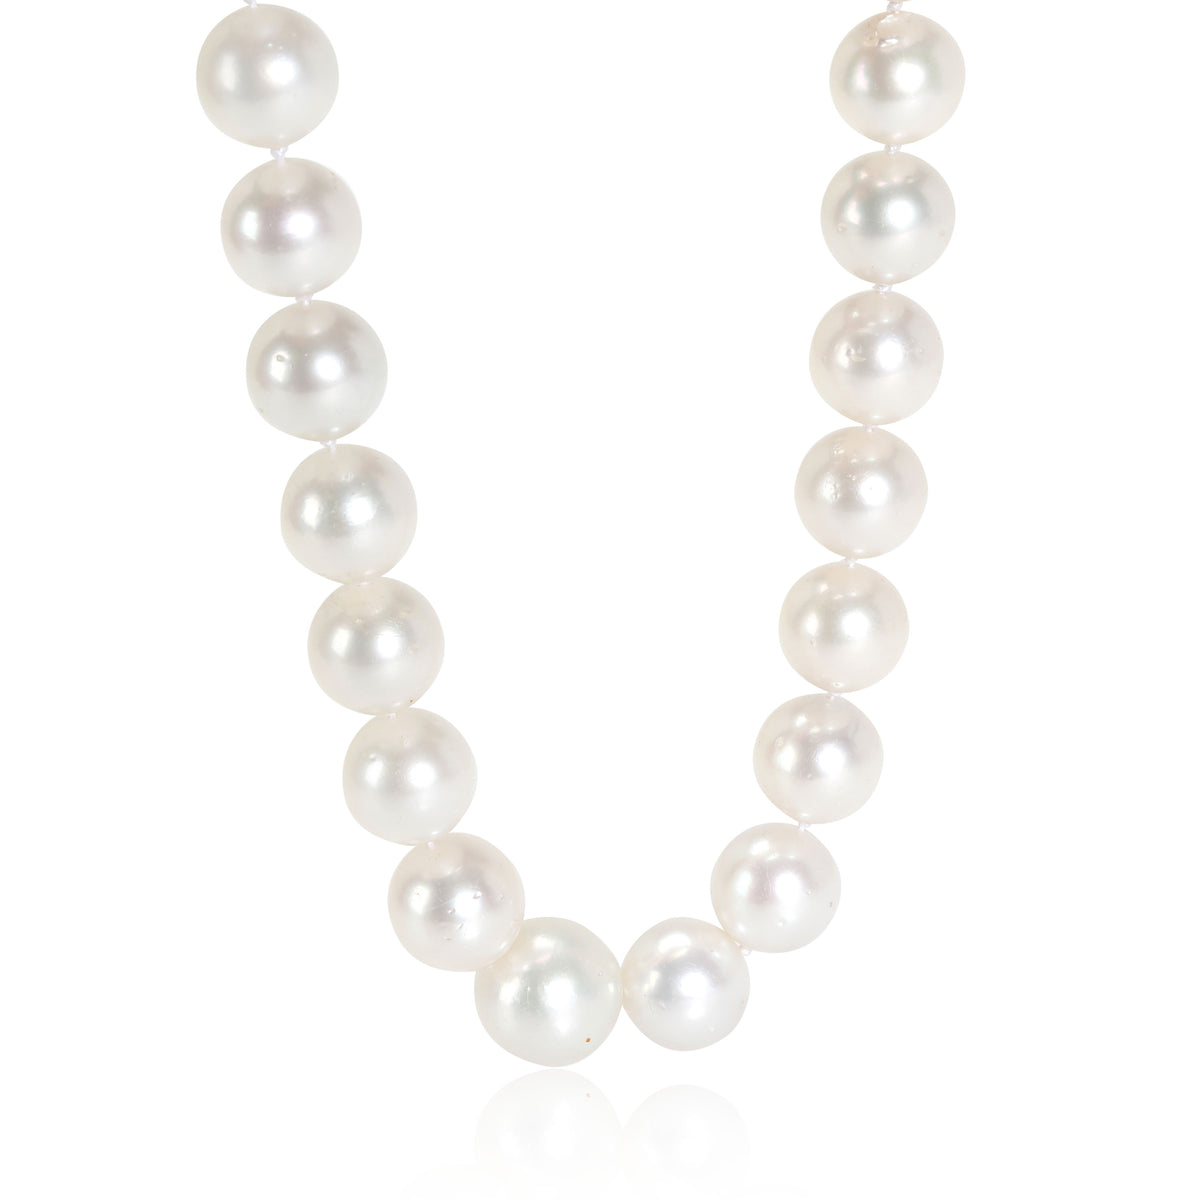 Graduated Cultured Pearl Necklace From 14mm To 28mm With Crystal Clasp